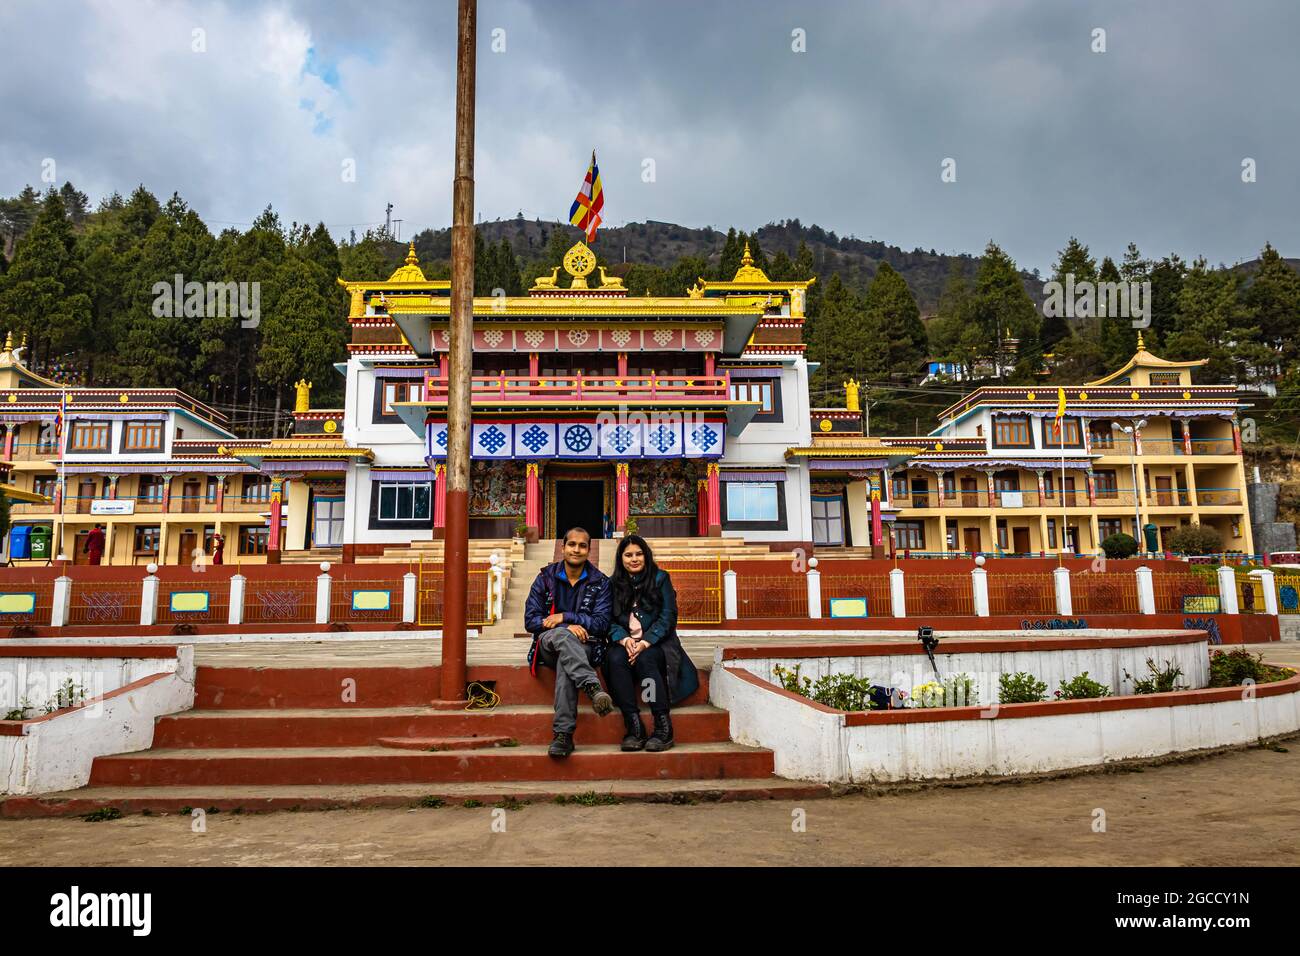 young couple sitting in front of ancient buddhist colorful monastery at day image is taken at bomdila monastery arunachal pradesh india. Stock Photo